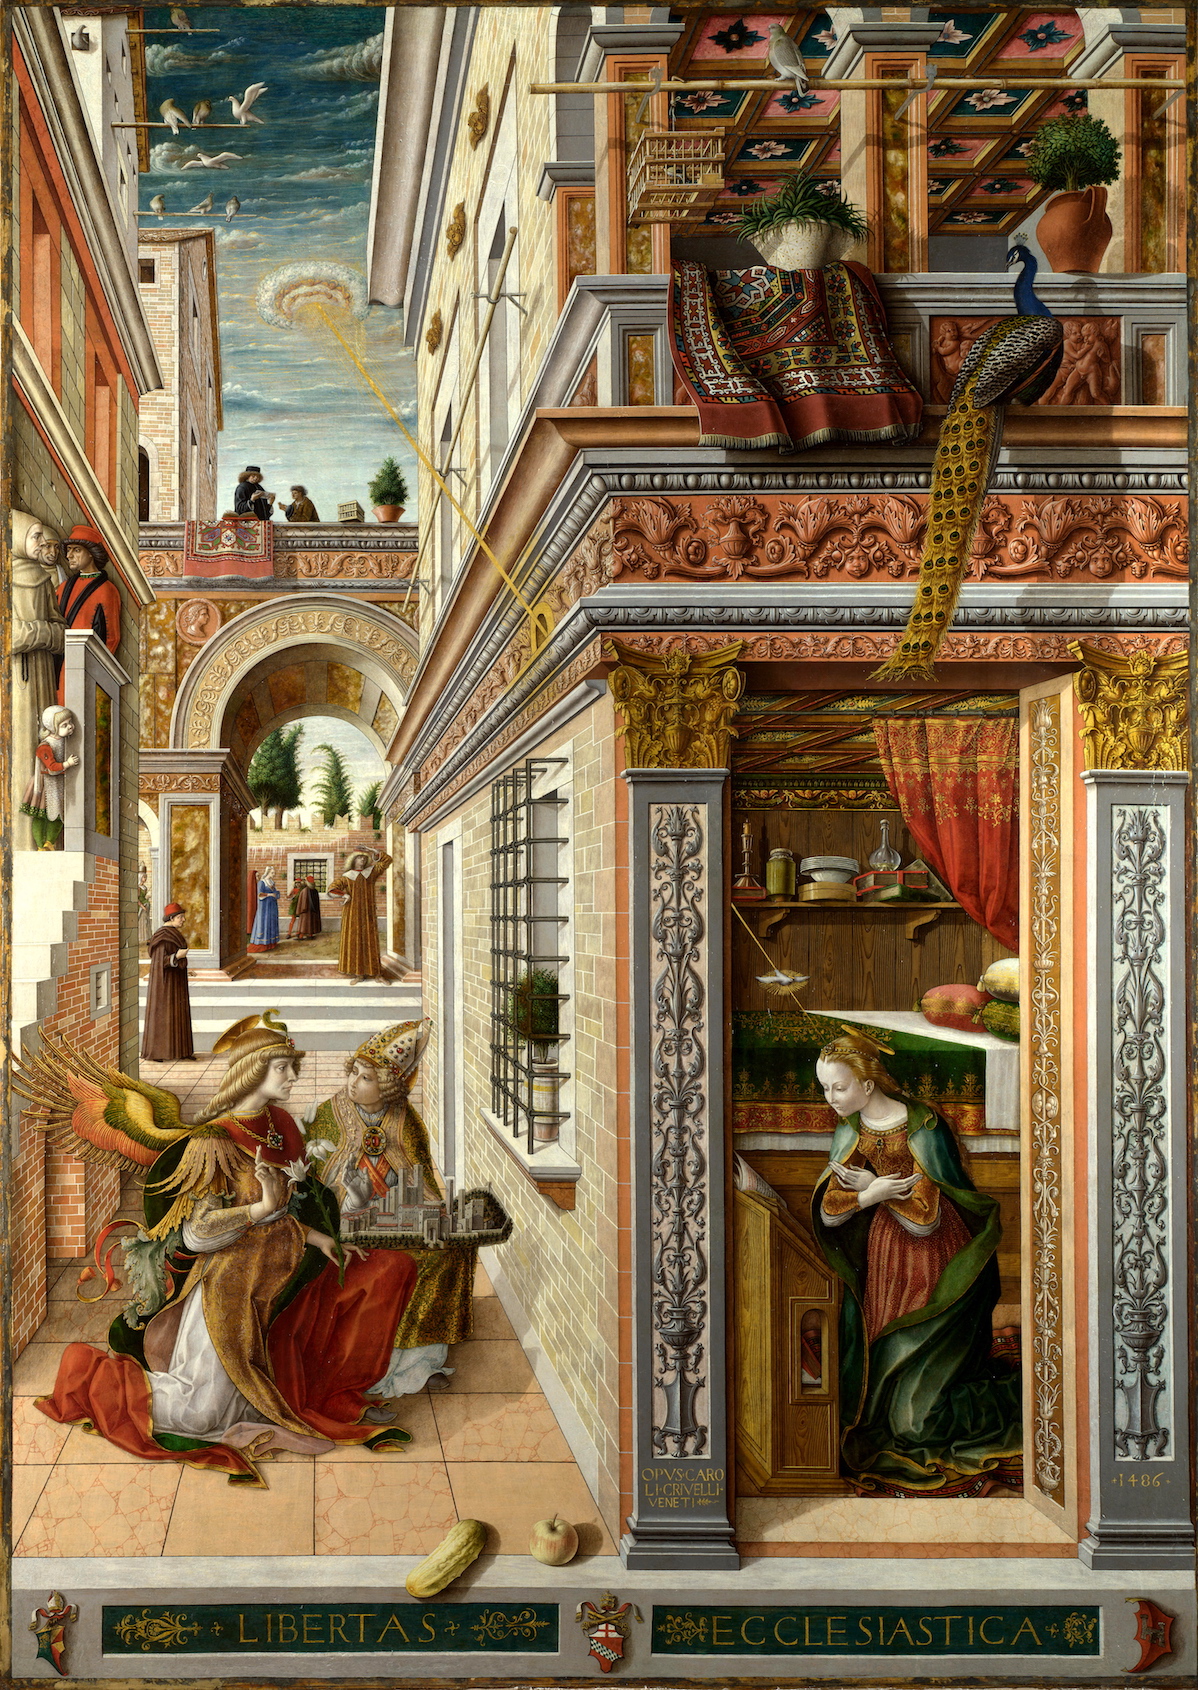 Oil painting by Carlo Crivelli of Mary's Annunciation.